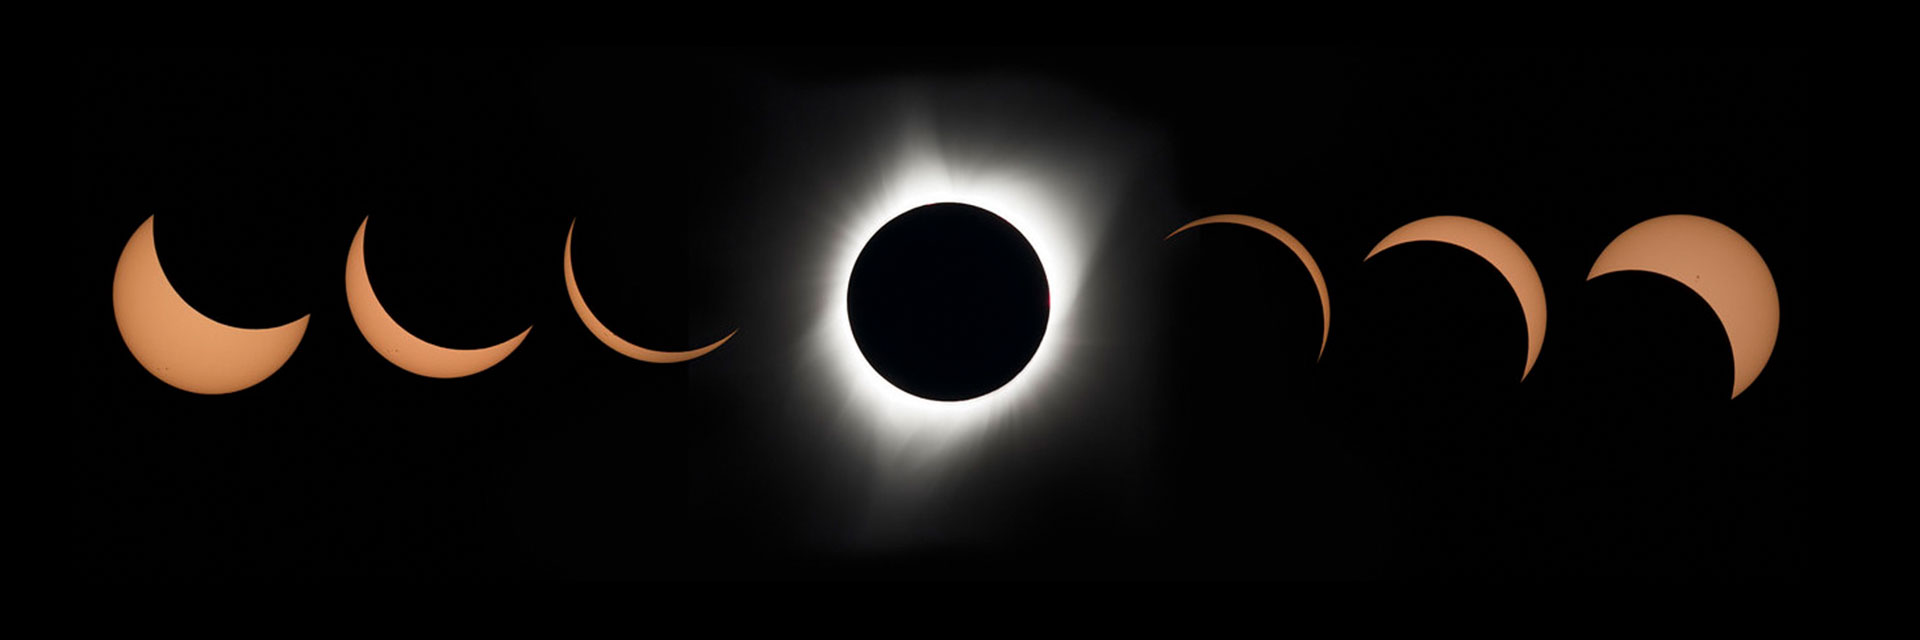 Sequence of images showing the Sun in various stages of an eclipse